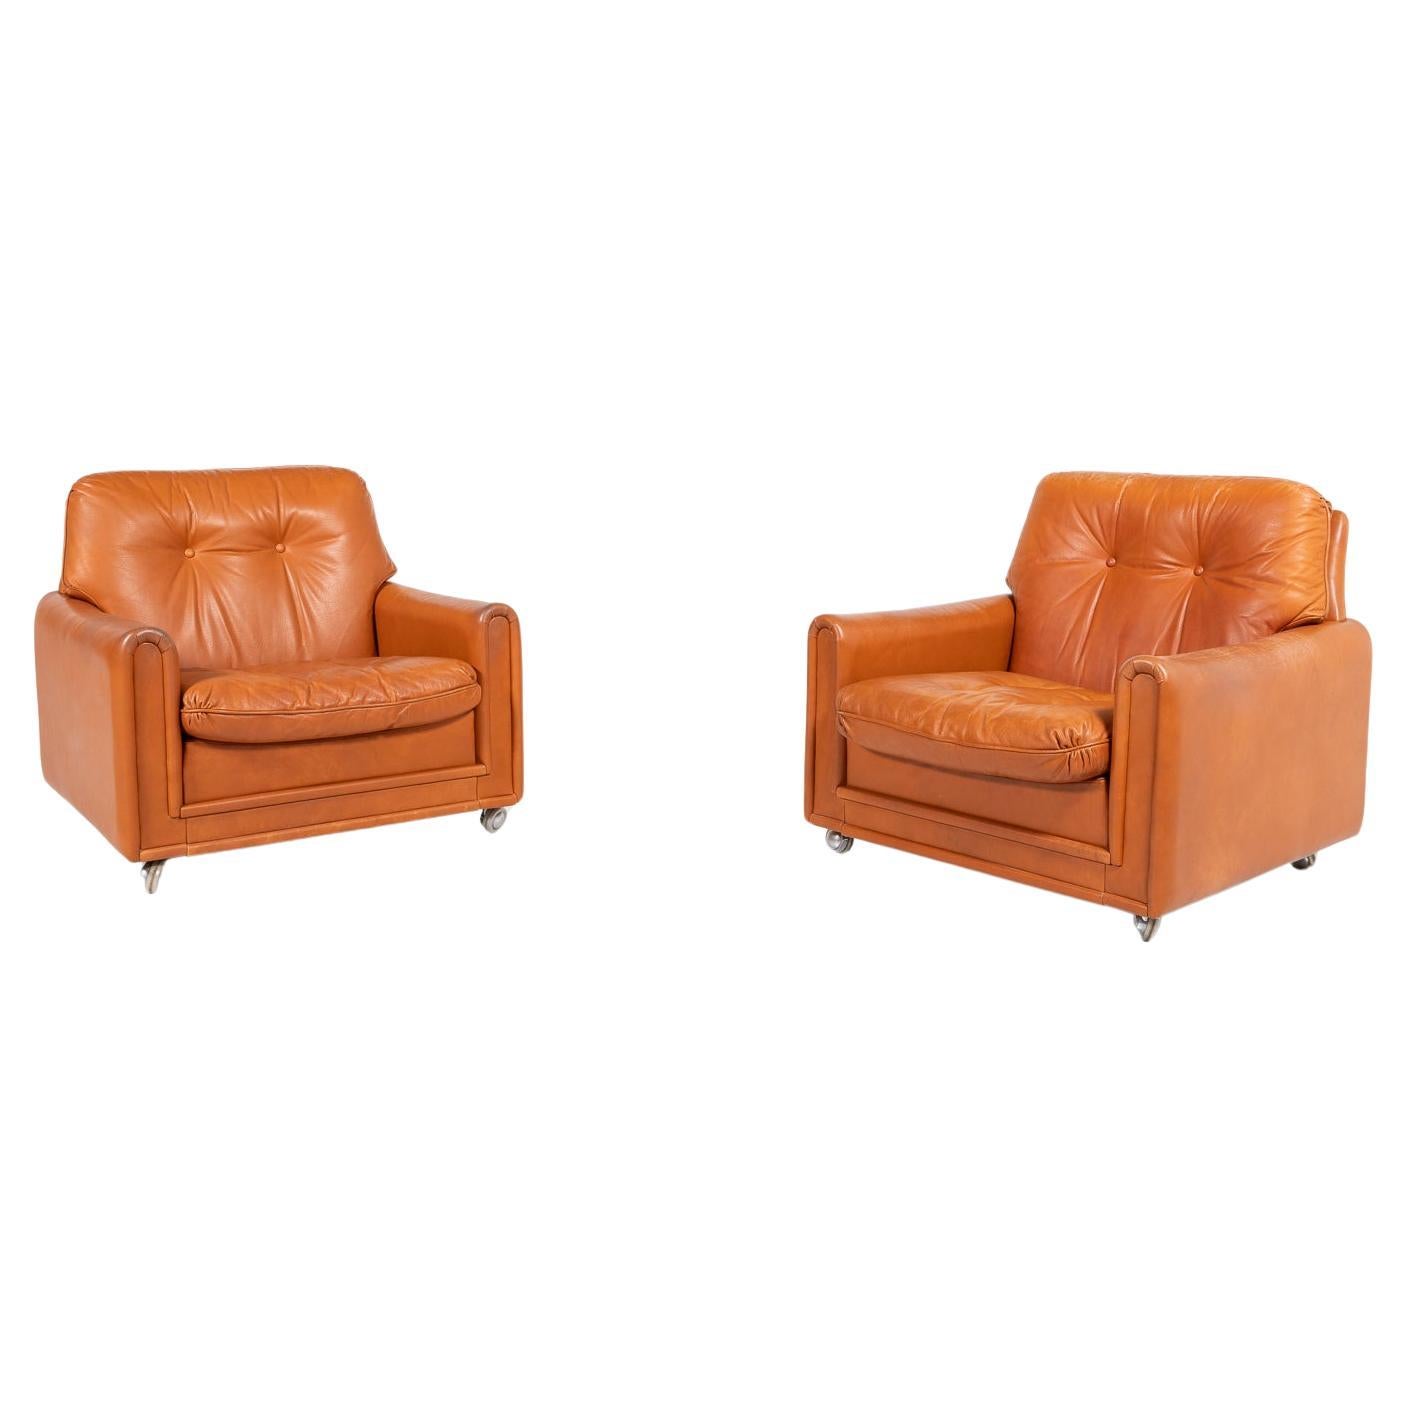 Danish Modern cognac leather armchairs from 1960’s For Sale